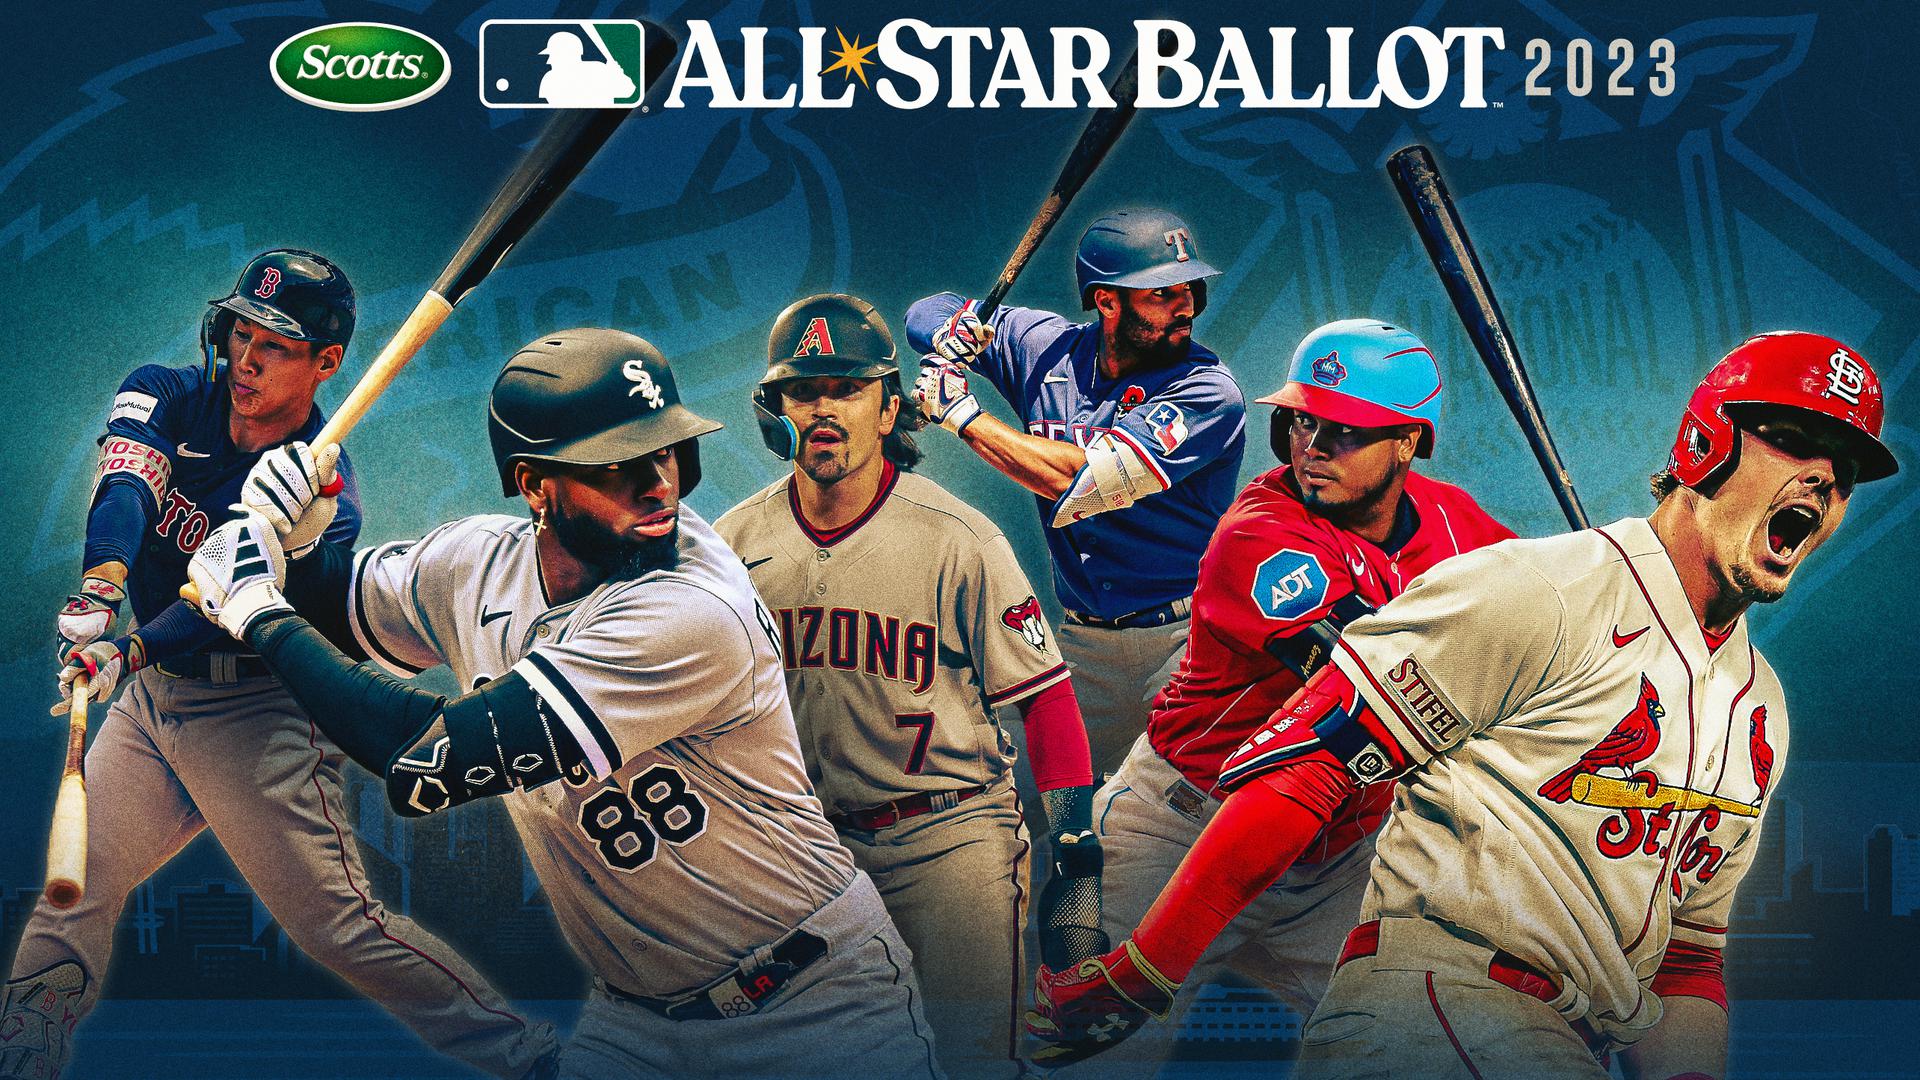 Six baseball players in various poses under a graphic promoting the All-Star Ballot